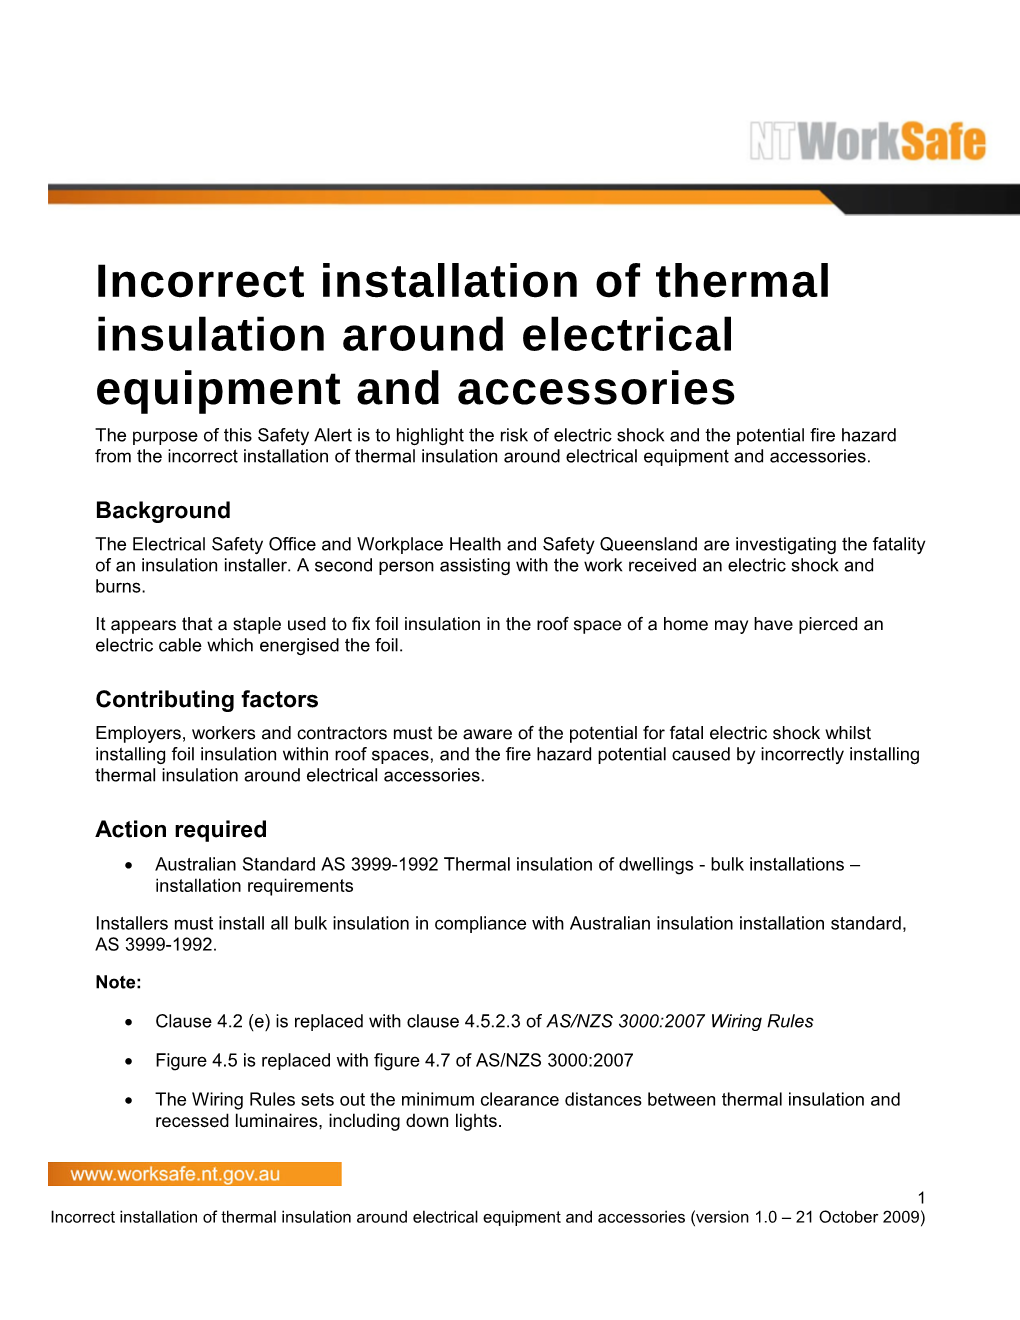 Safety Alert - Incorrect Installation of Thermal Insulation Around Electrical Equipment